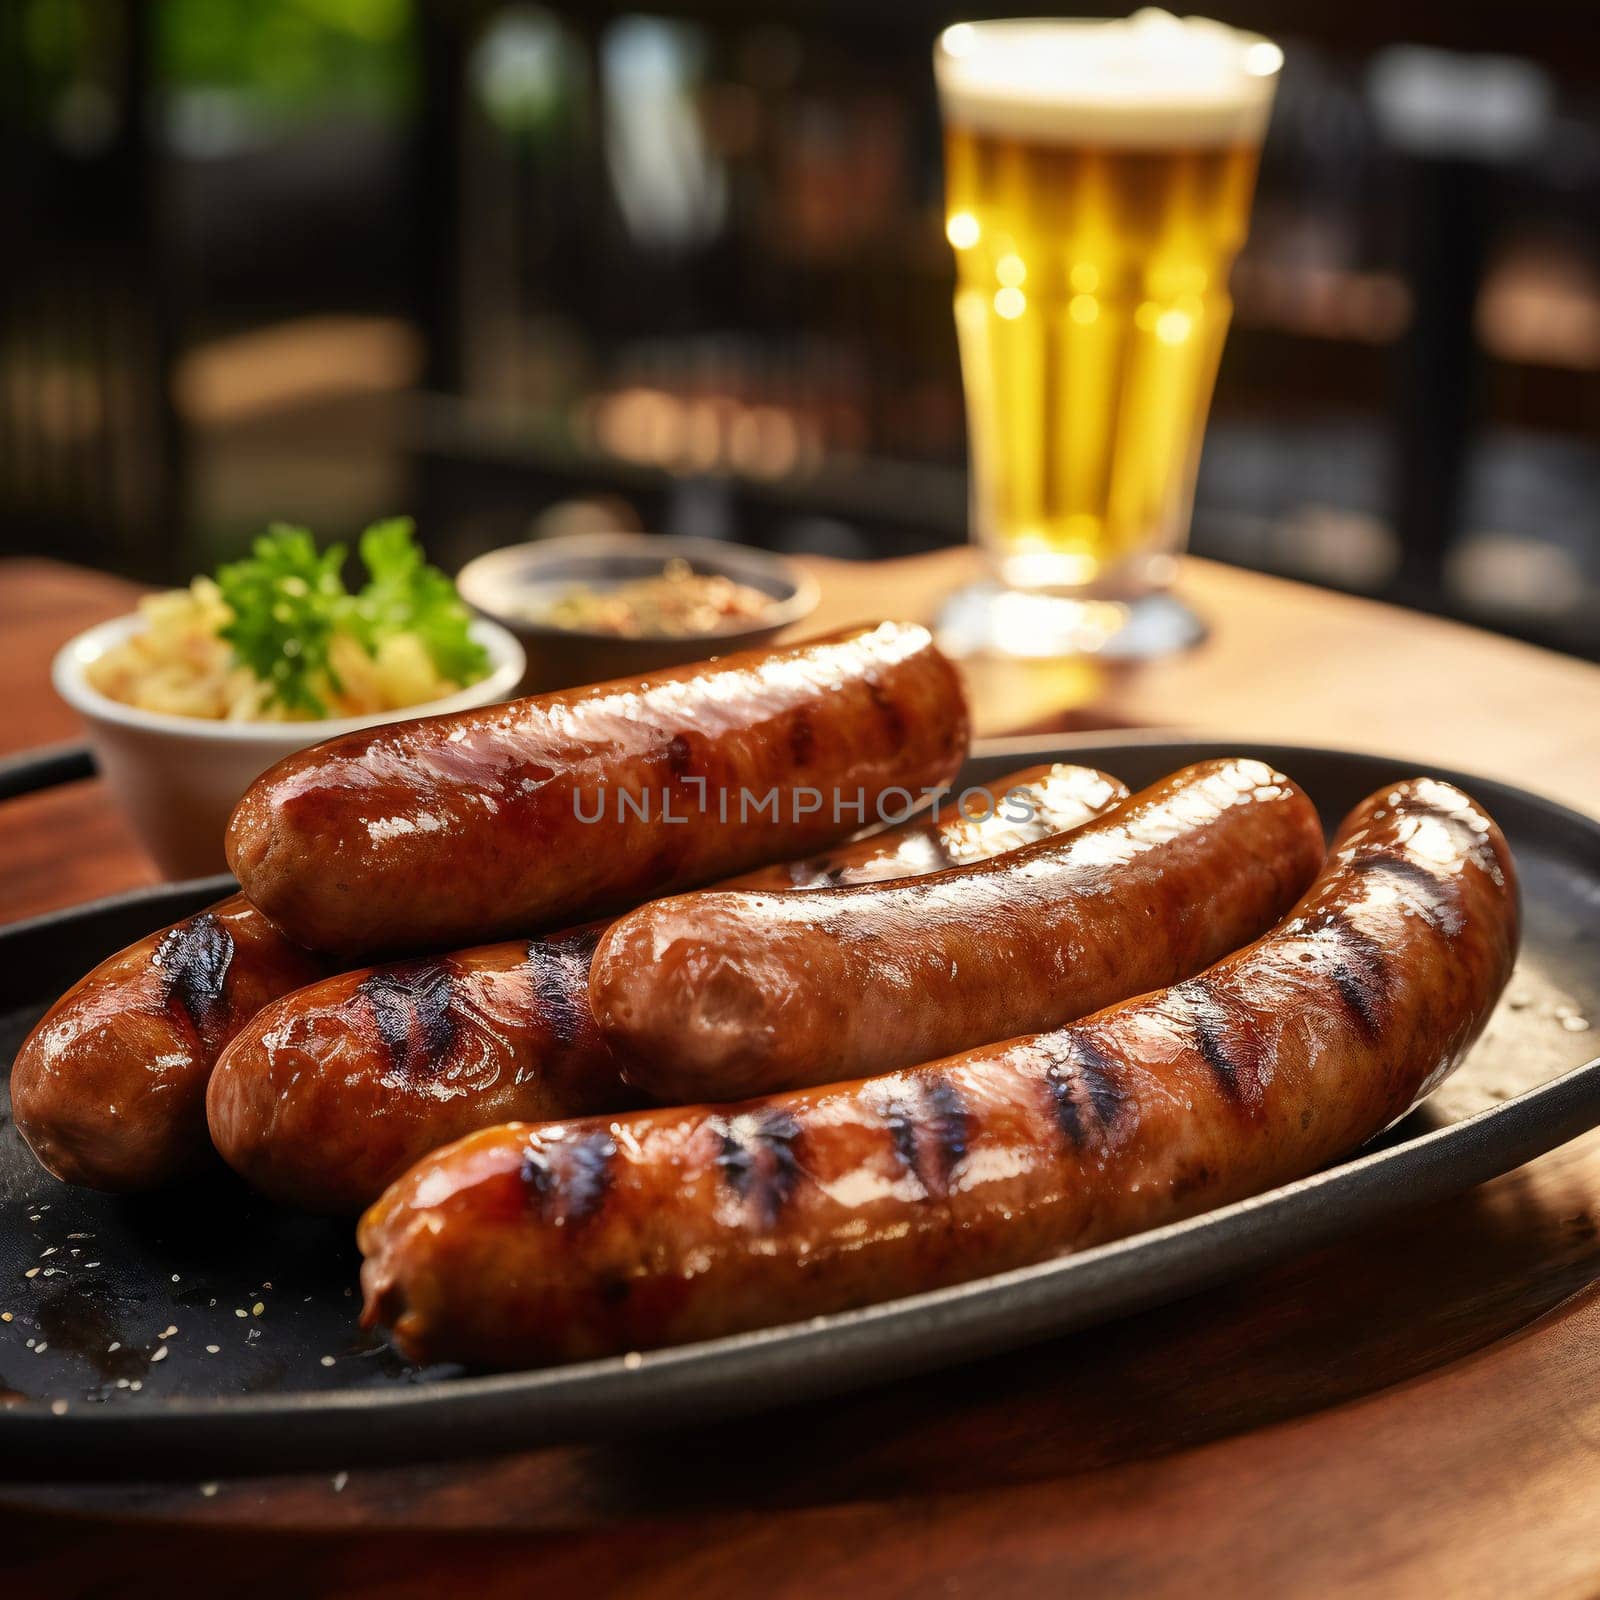 Grilled sausage with beer and mustard by juliet_summertime